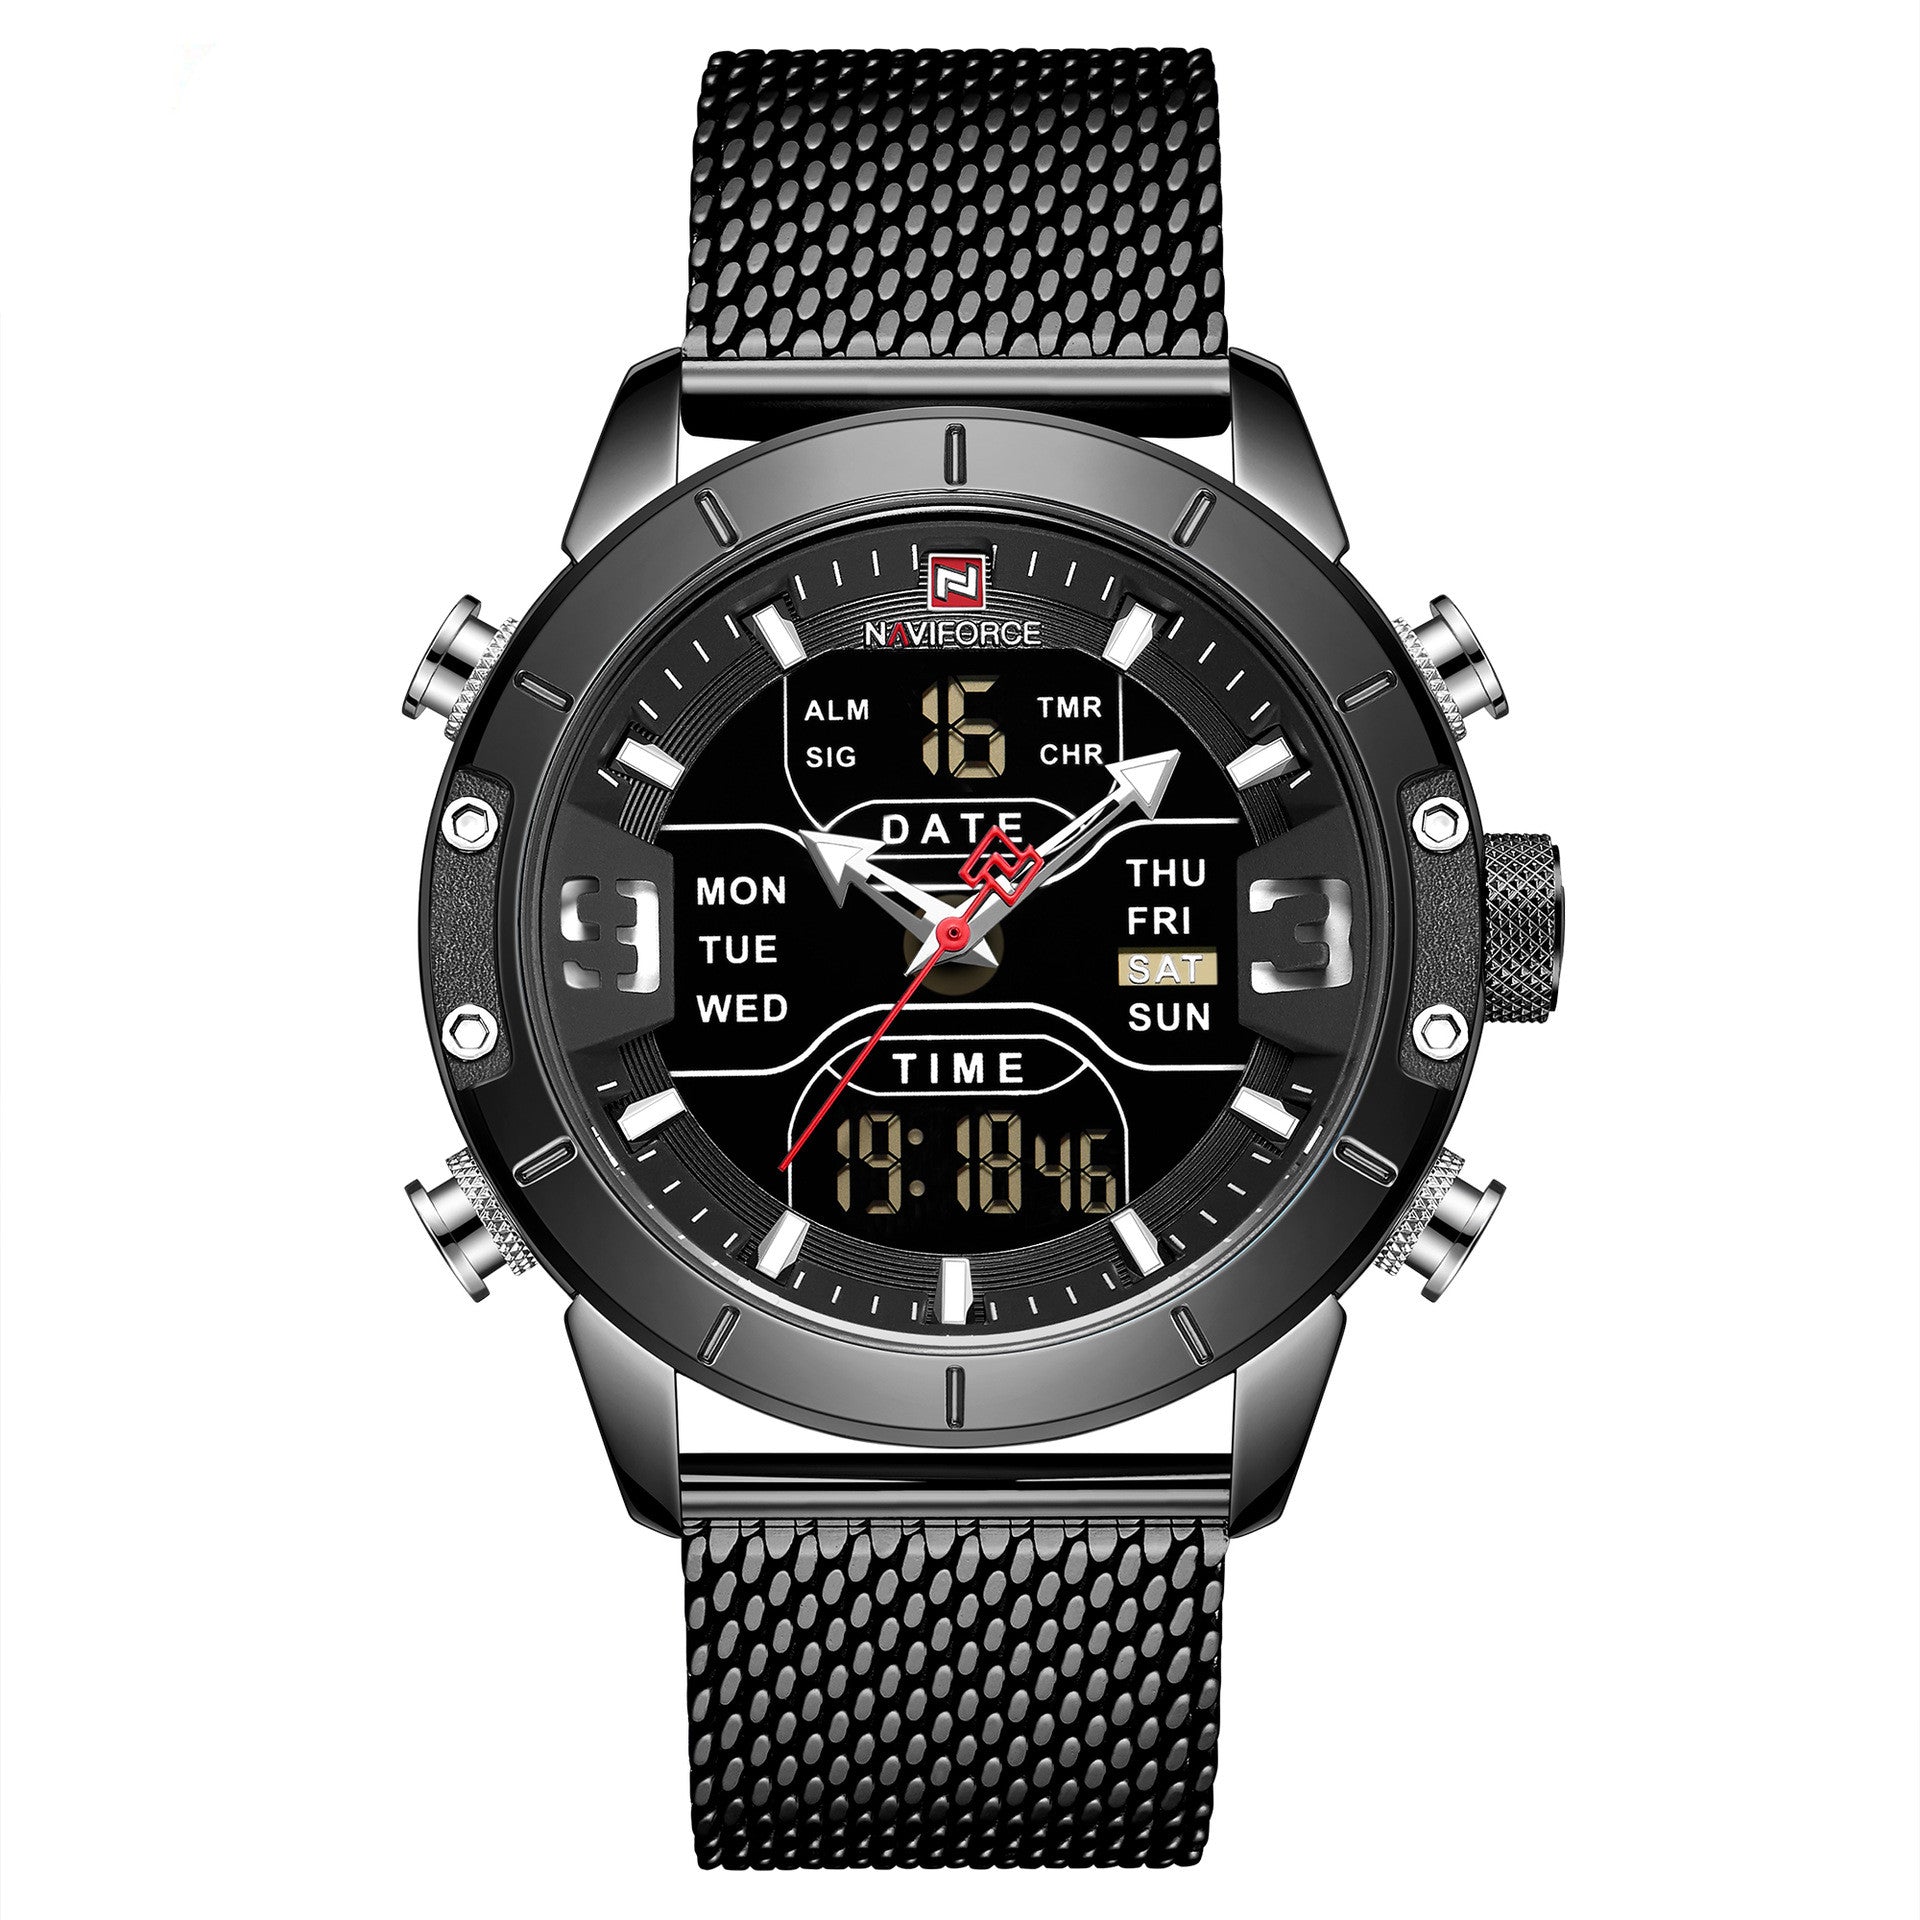 Double Display Multi-function Waterproof Sports Watch - Watches -  Trend Goods